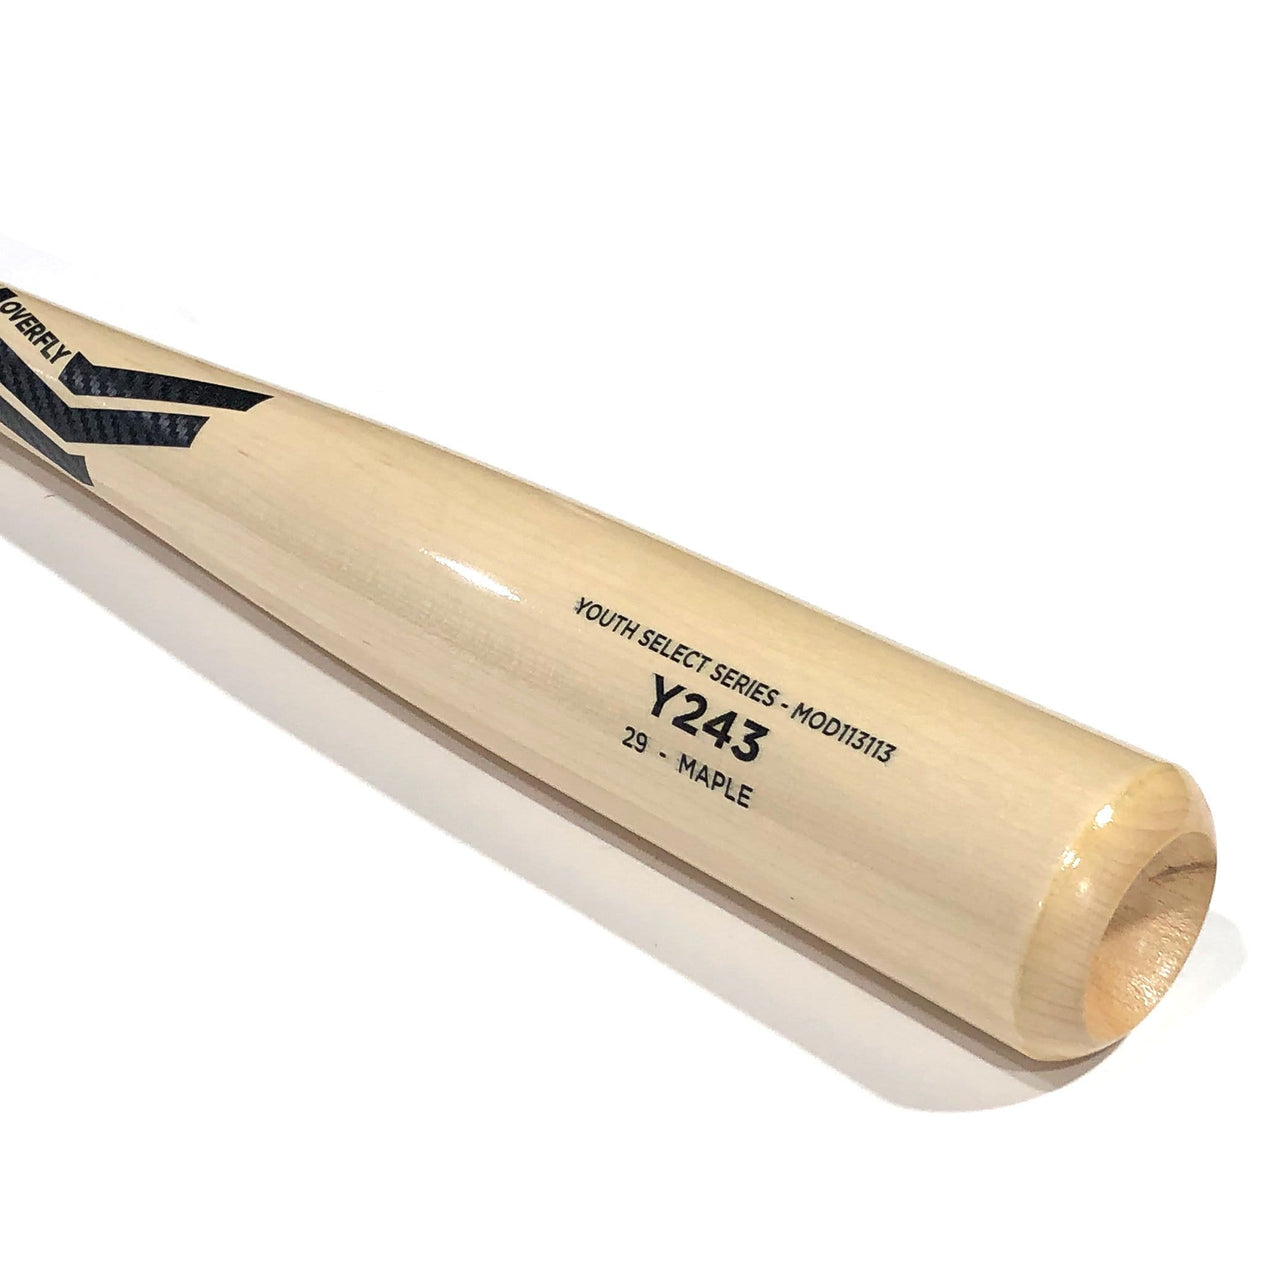 Overfly Sports Playing Bats Natural (Clear Coated) | Black Carbon Fiber / 29" / (-4) Overfly Sports Model Y243 Wood Bat | 29" (-4) | Maple